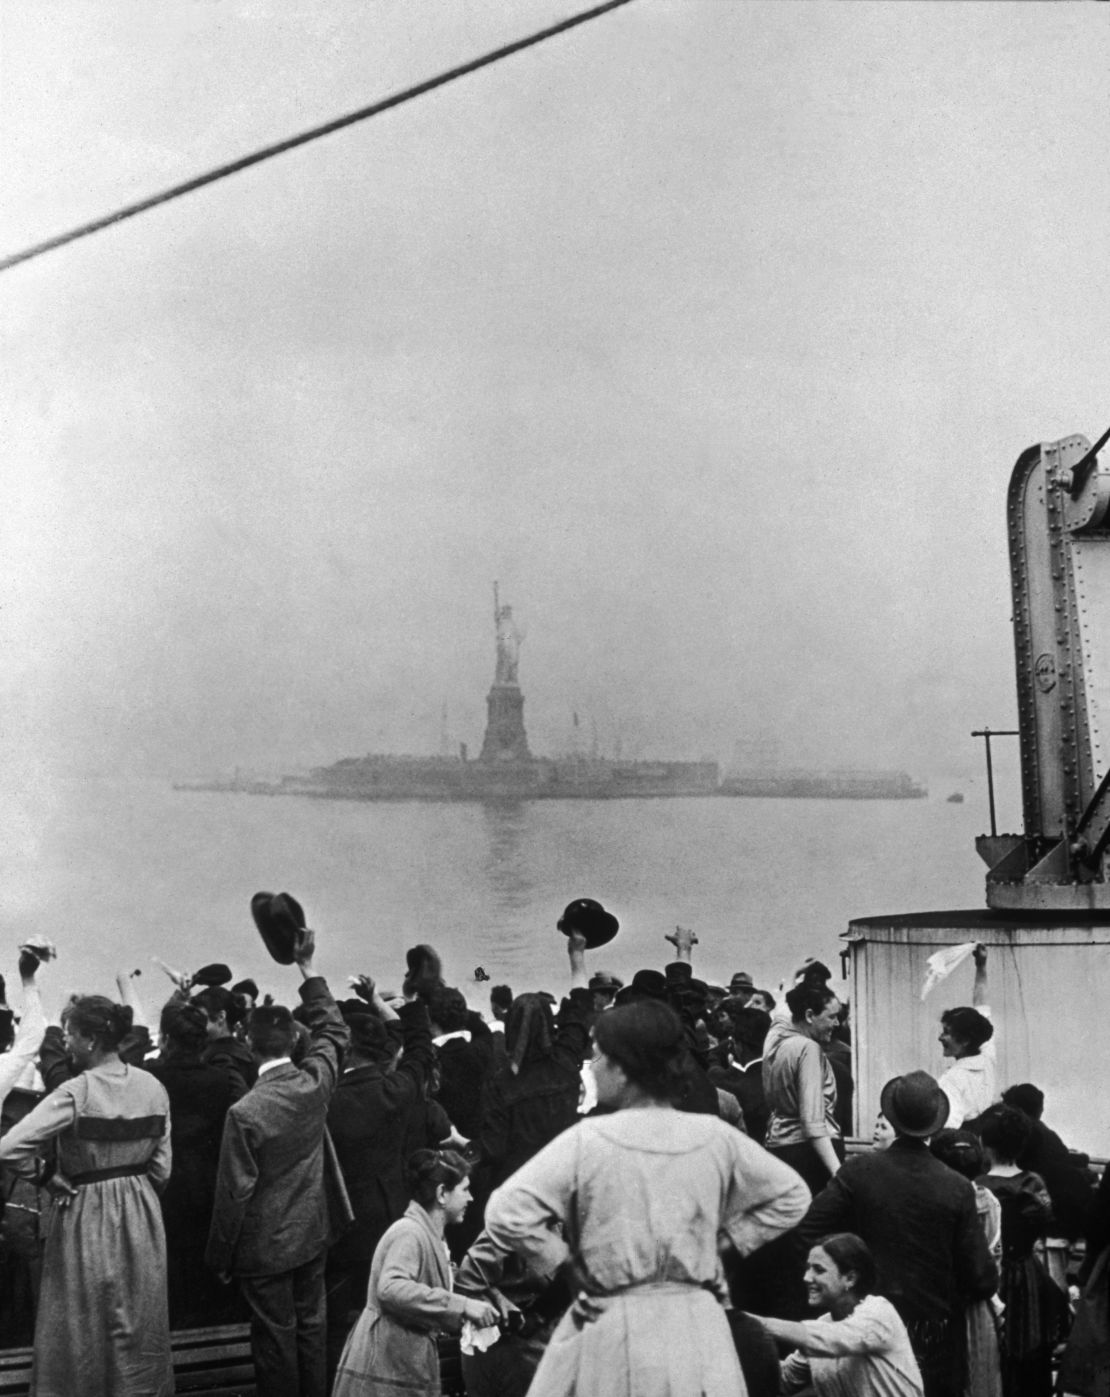 Immigrants traveling aboard a ship celebrate as they catch their first glimpse of the Statue of Liberty and Ellis Island in New York Harbor in 1915. 